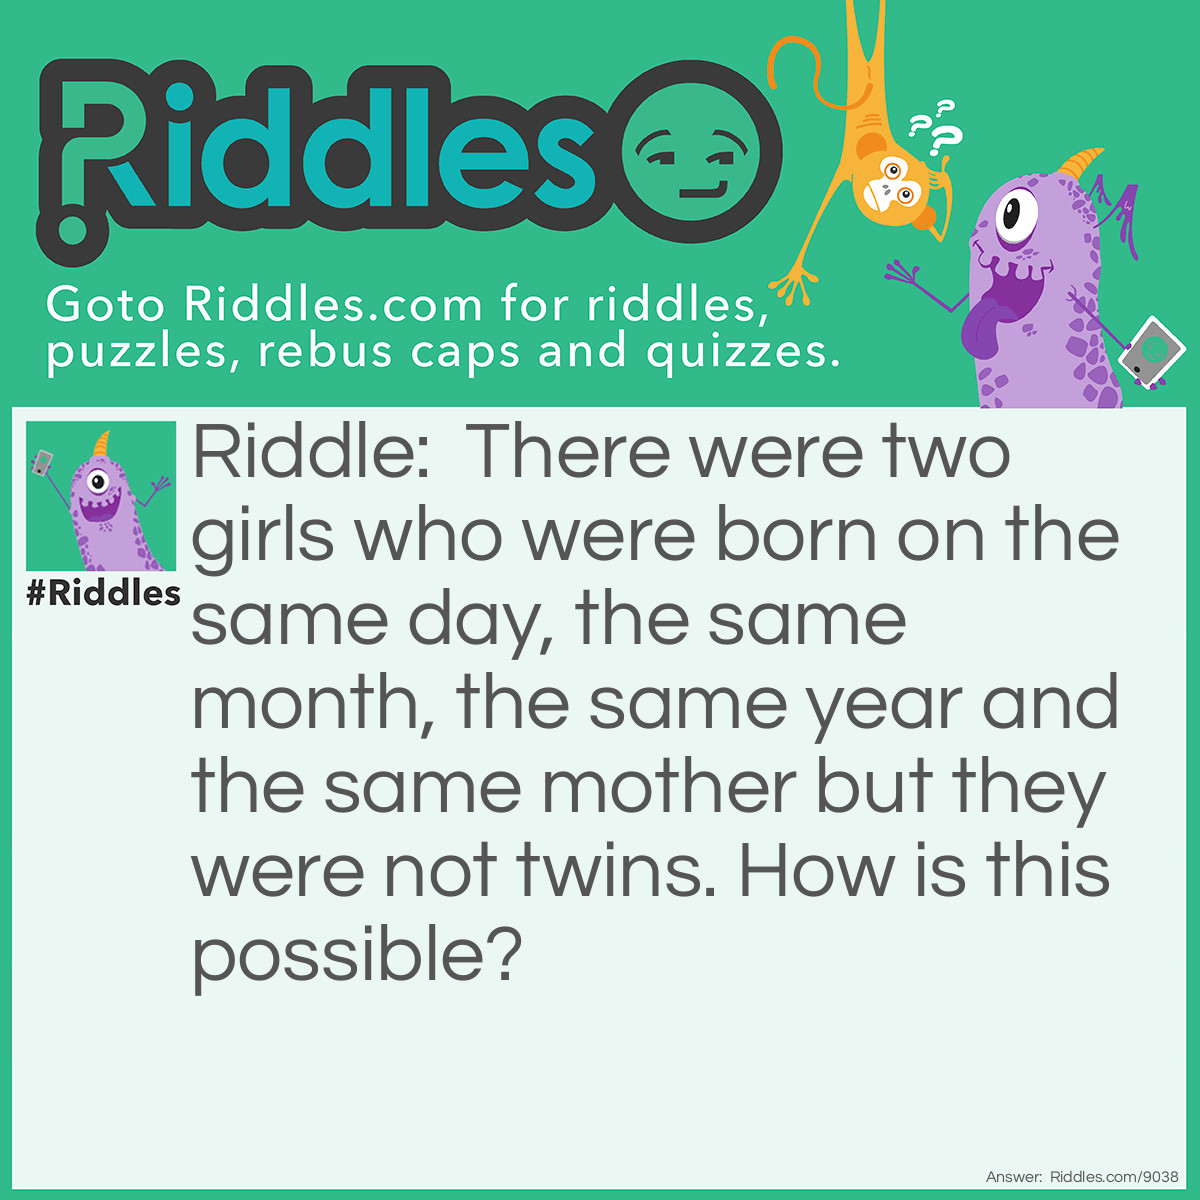 Riddle: There were two girls who were born on the same day, the same month, the same year and the same mother but they were not twins. How is this possible? Answer: The girls were two from triplets.